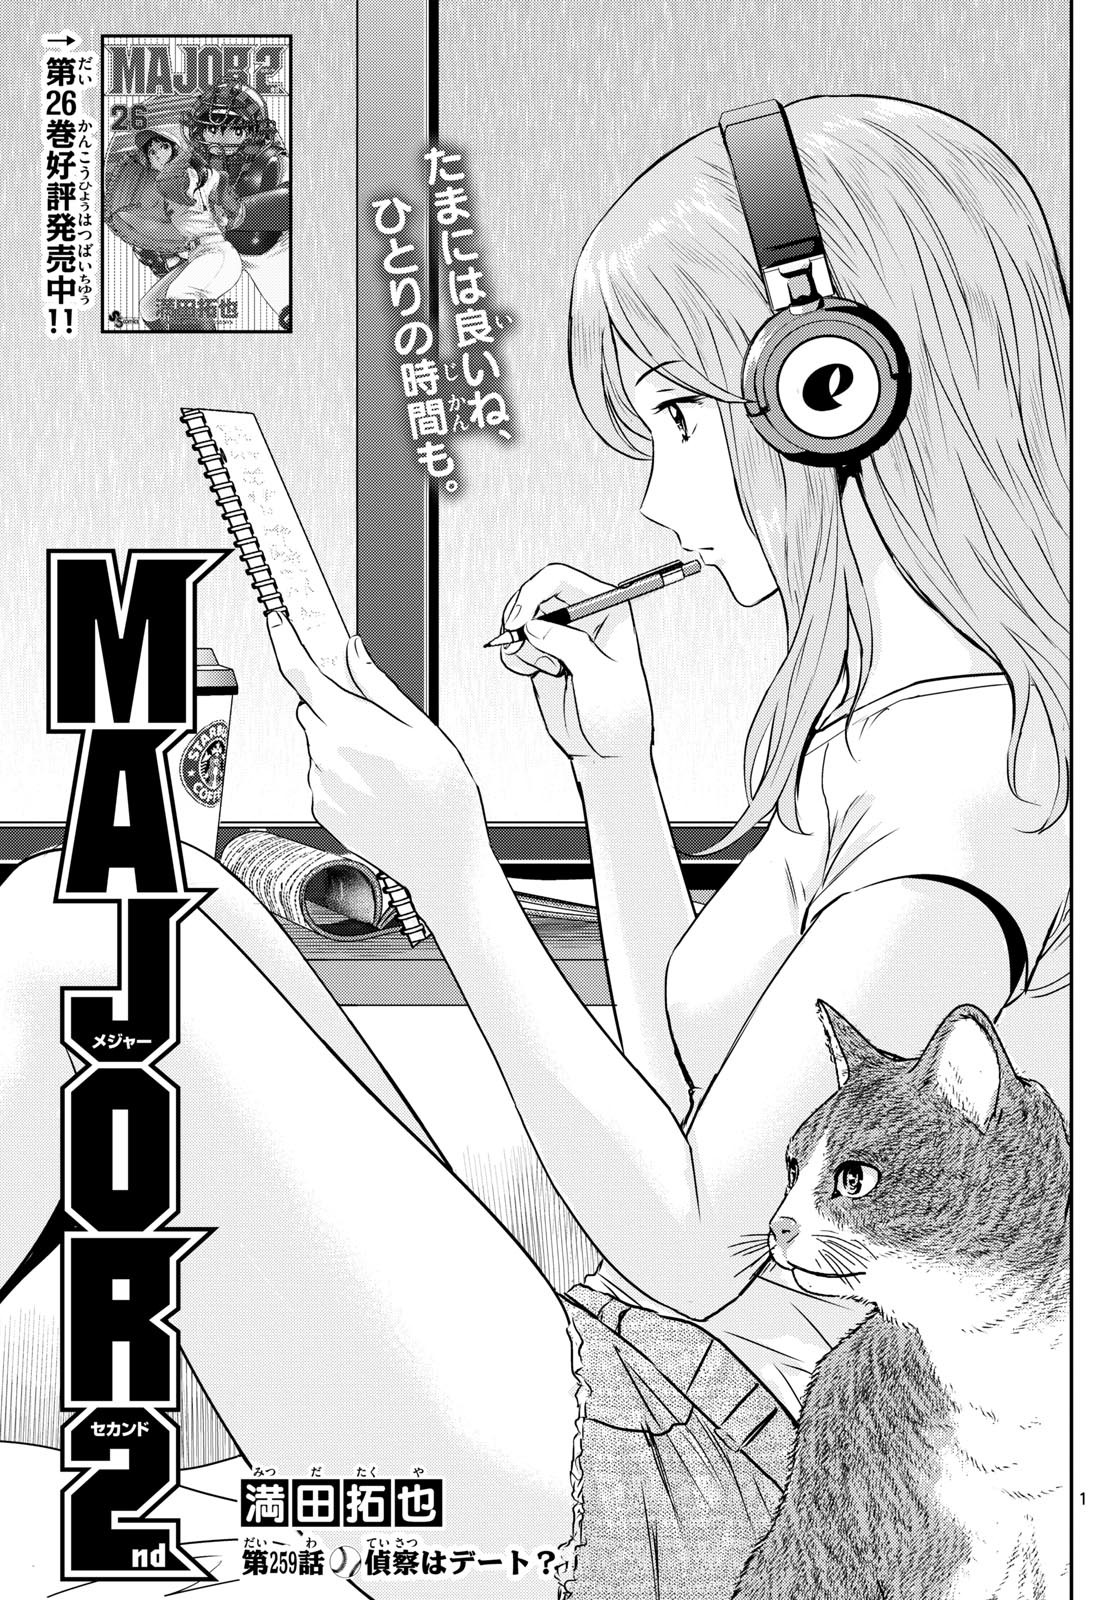 Major 2nd - メジャーセカンド - Chapter 259 - Page 1